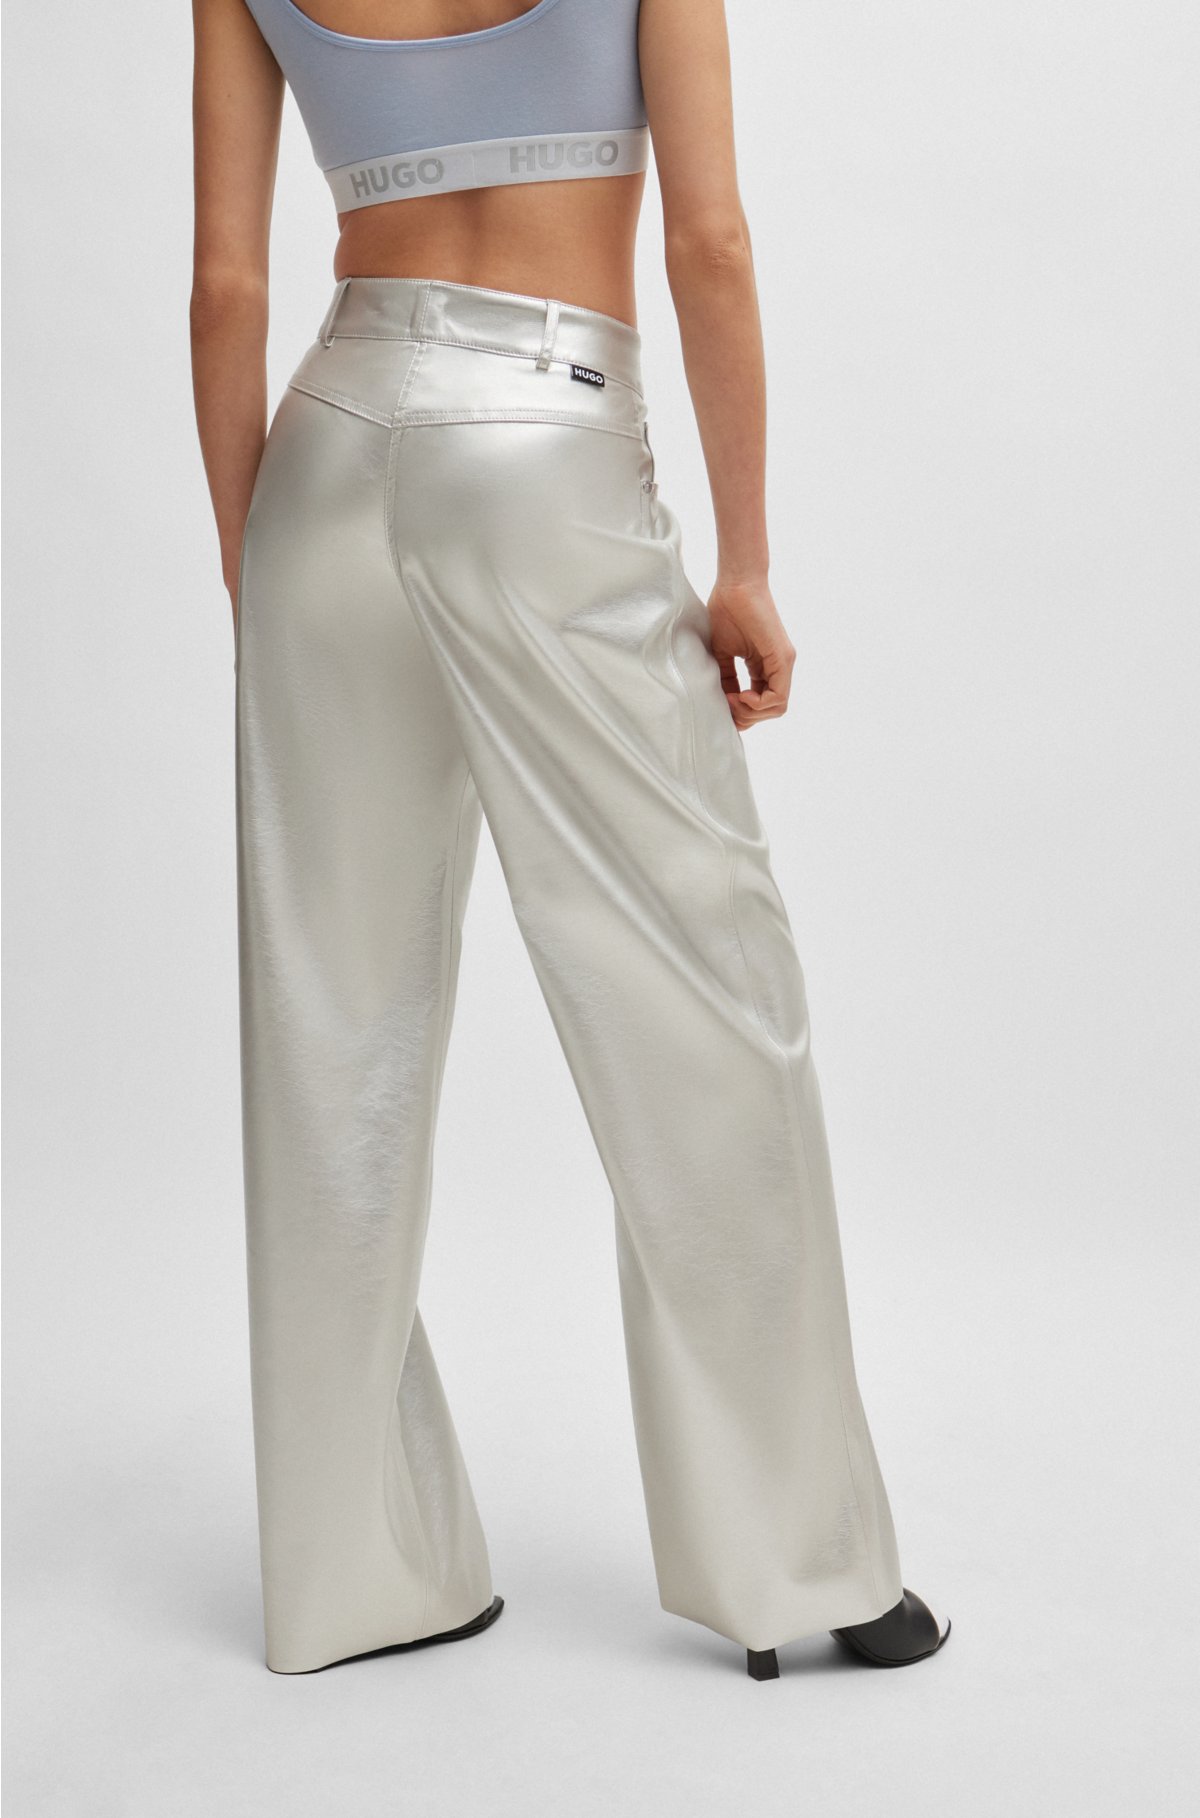 Relaxed-fit trousers in metallic faux leather, Silver